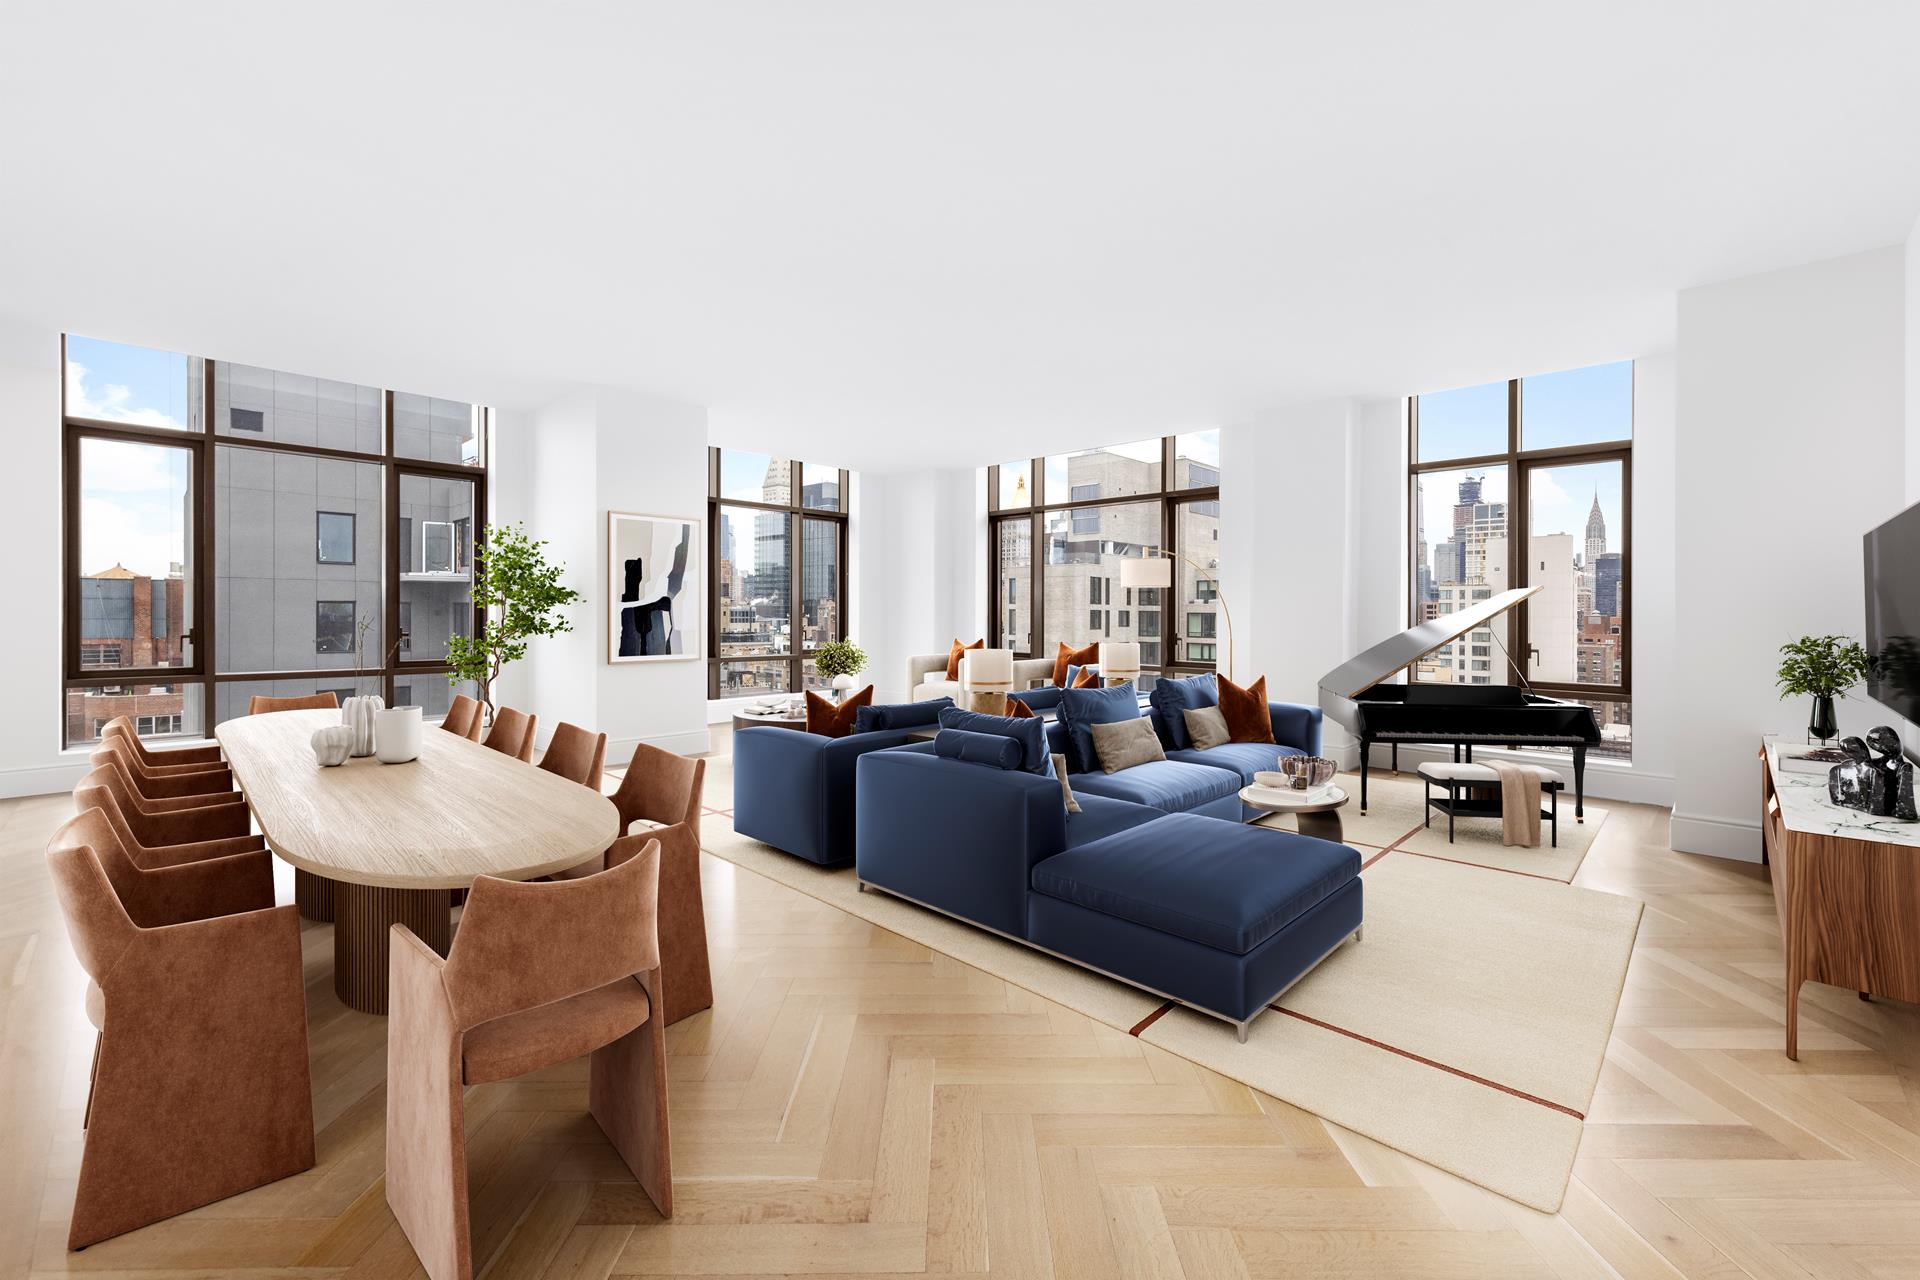 215 East 19th Street T16b, Gramercy Park, Downtown, NYC - 4 Bedrooms  
5.5 Bathrooms  
6 Rooms - 